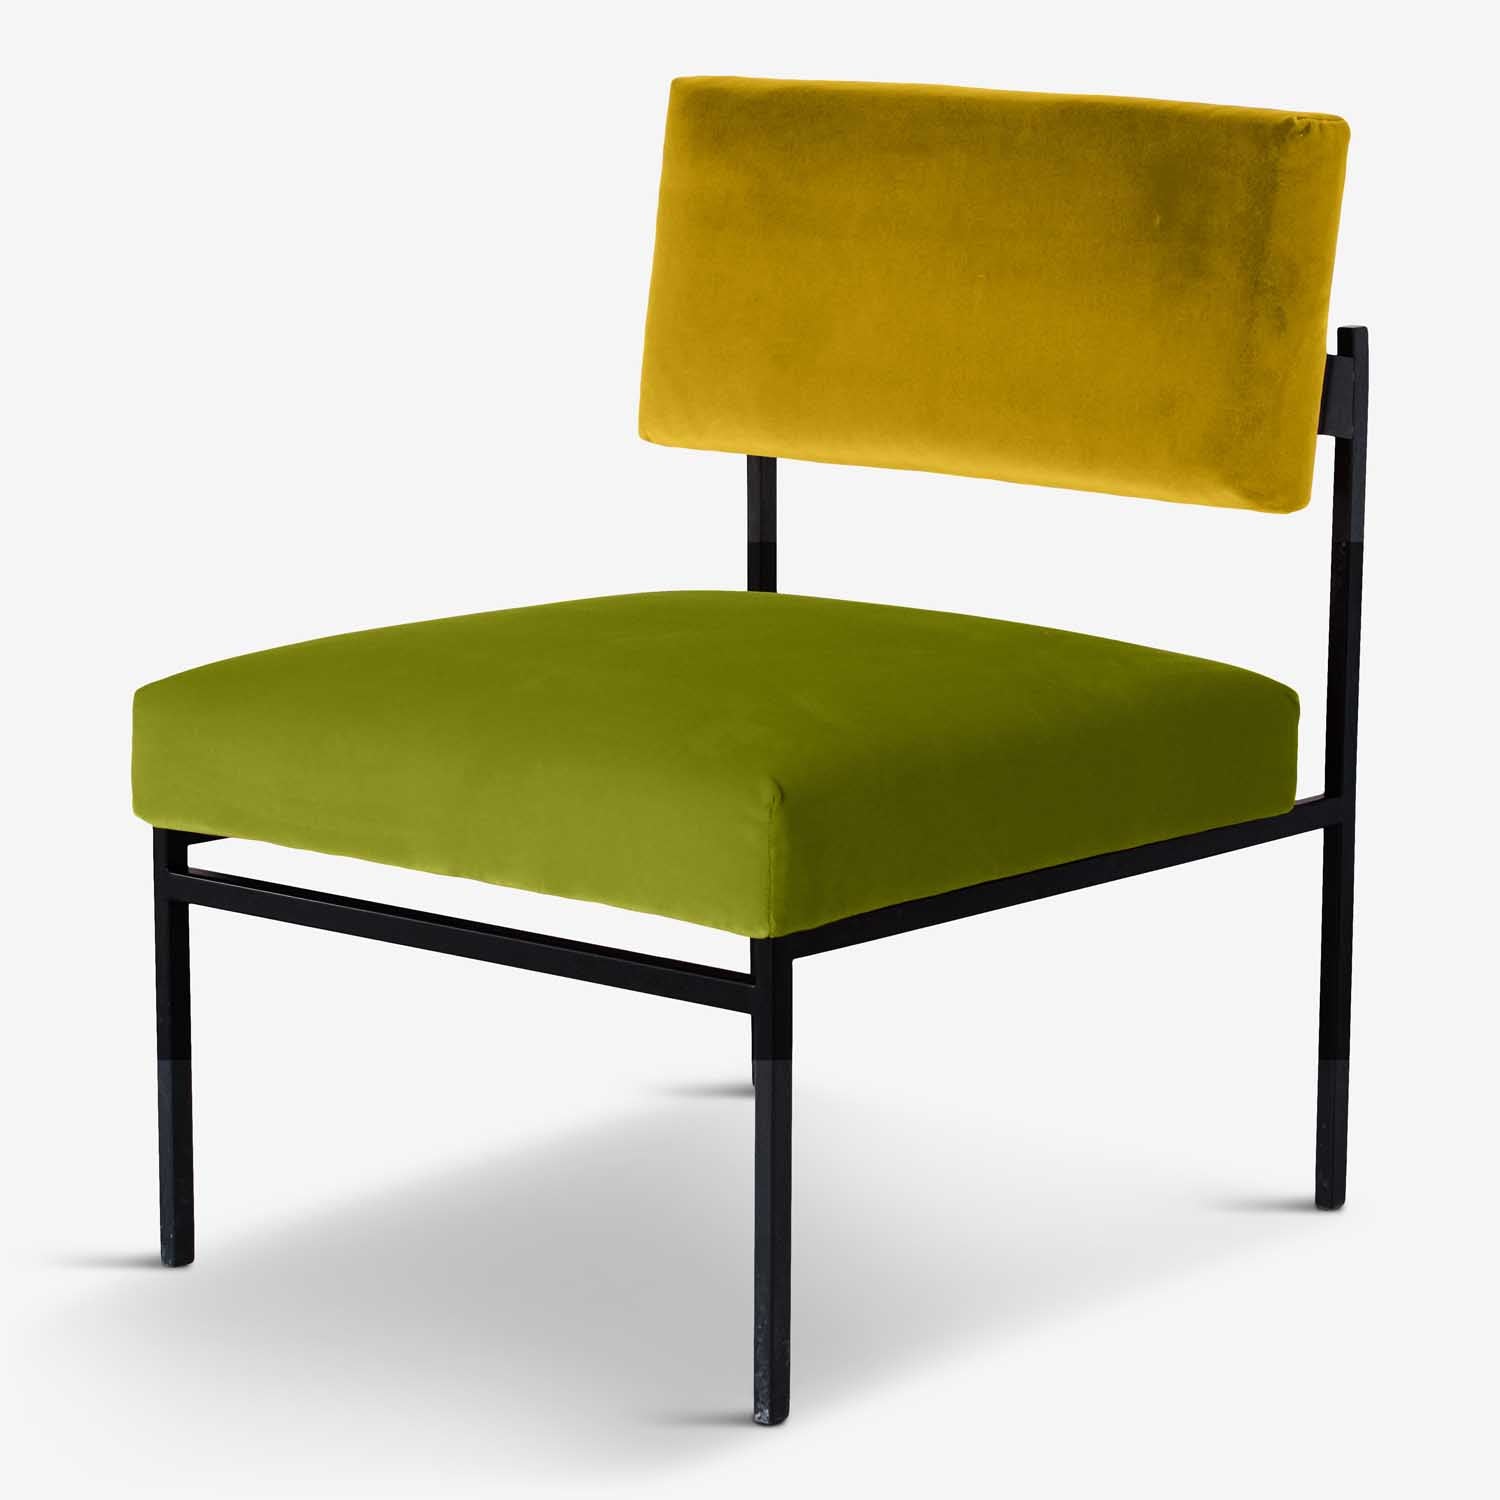 iconic design for hotel lobbies, green and yellow velvet lounge chair